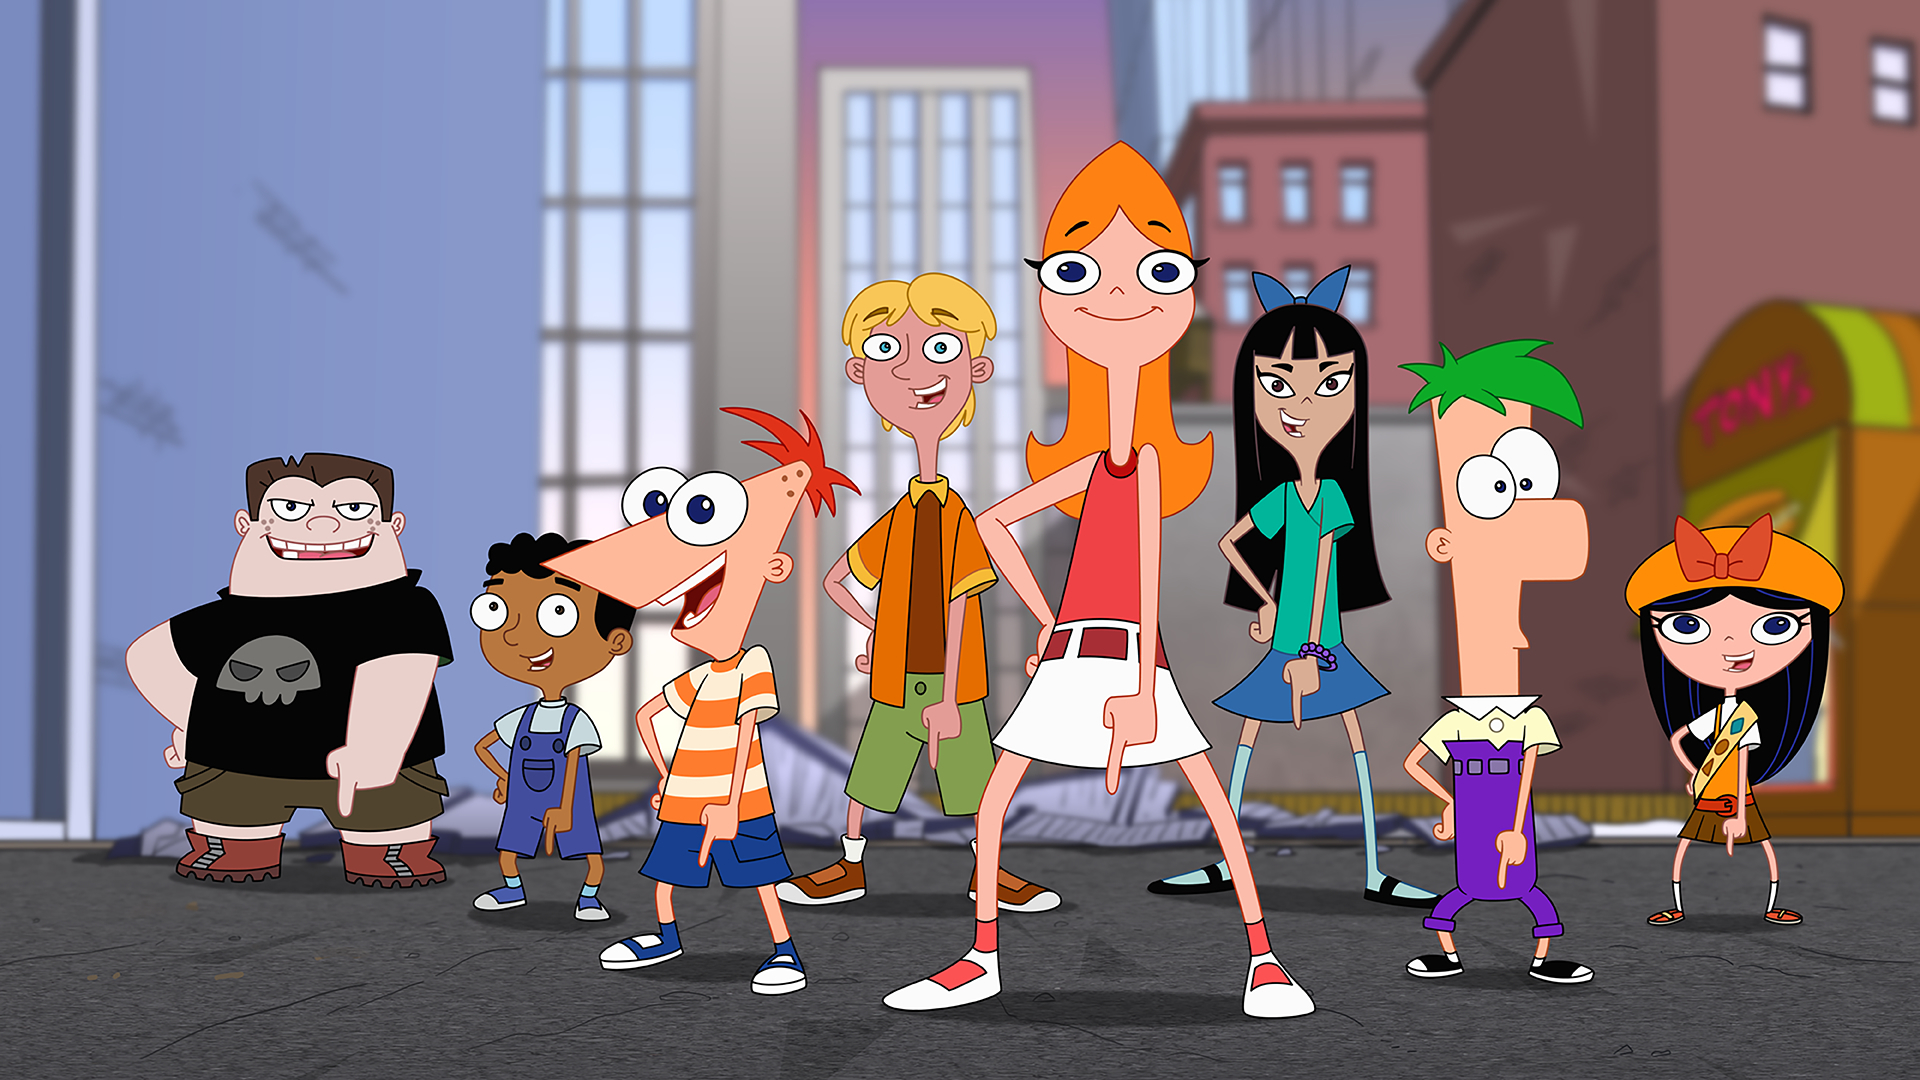 First Look: “Phineas And Ferb The Movie: Candace Against The Universe” coming to Disney+